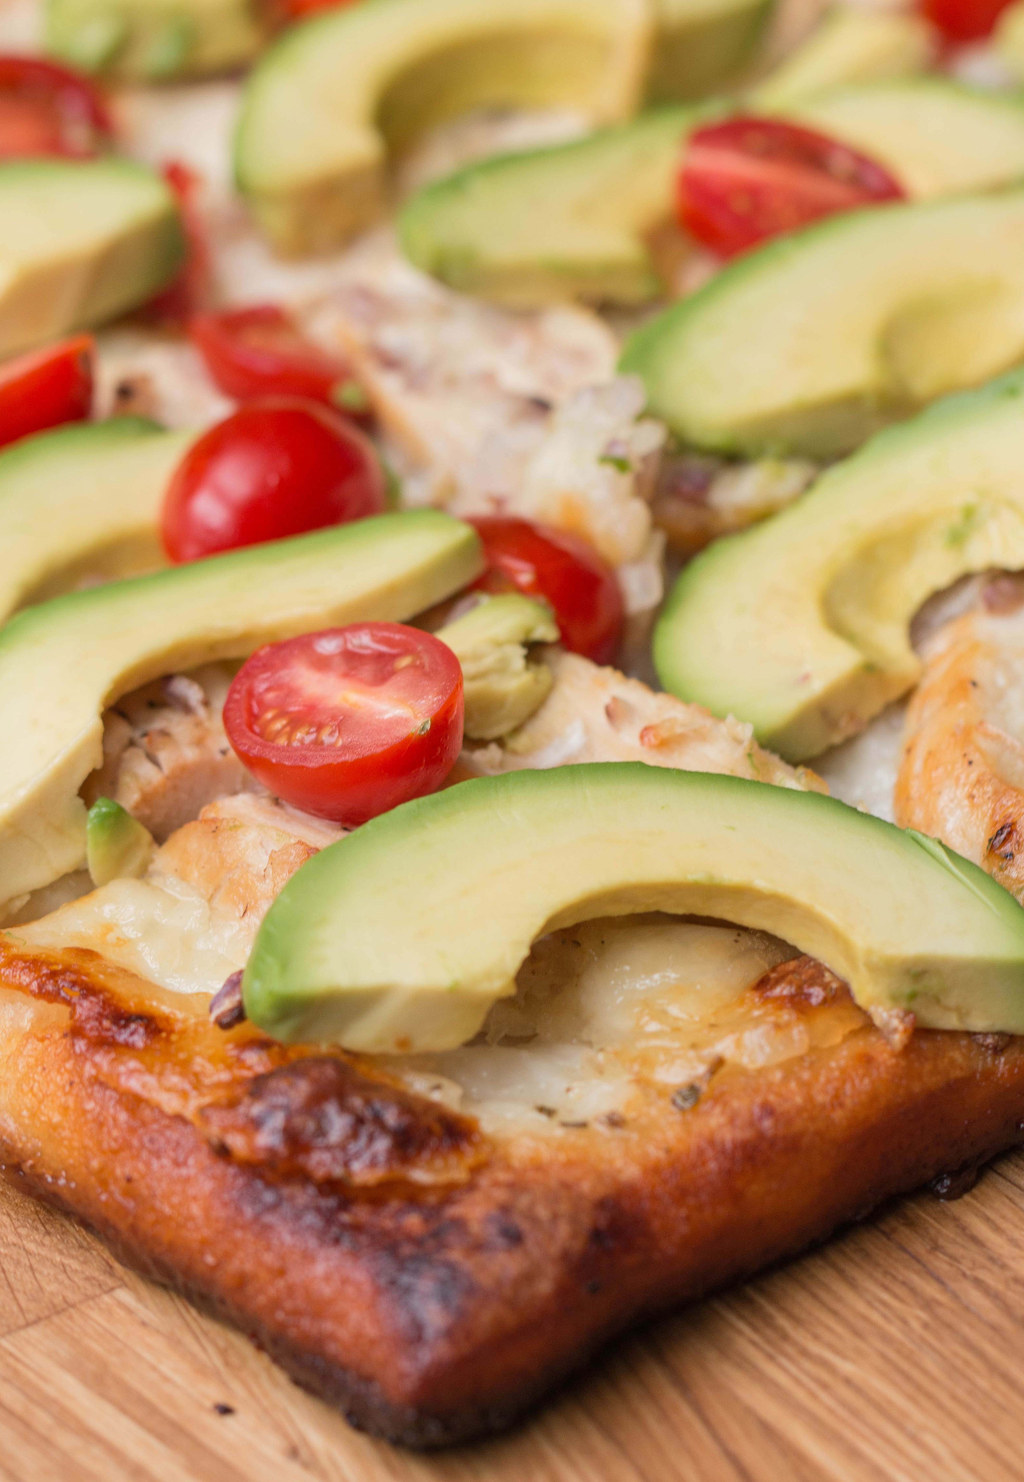 Here's What Happens When Avocado, Pizza, And Chicken Collide